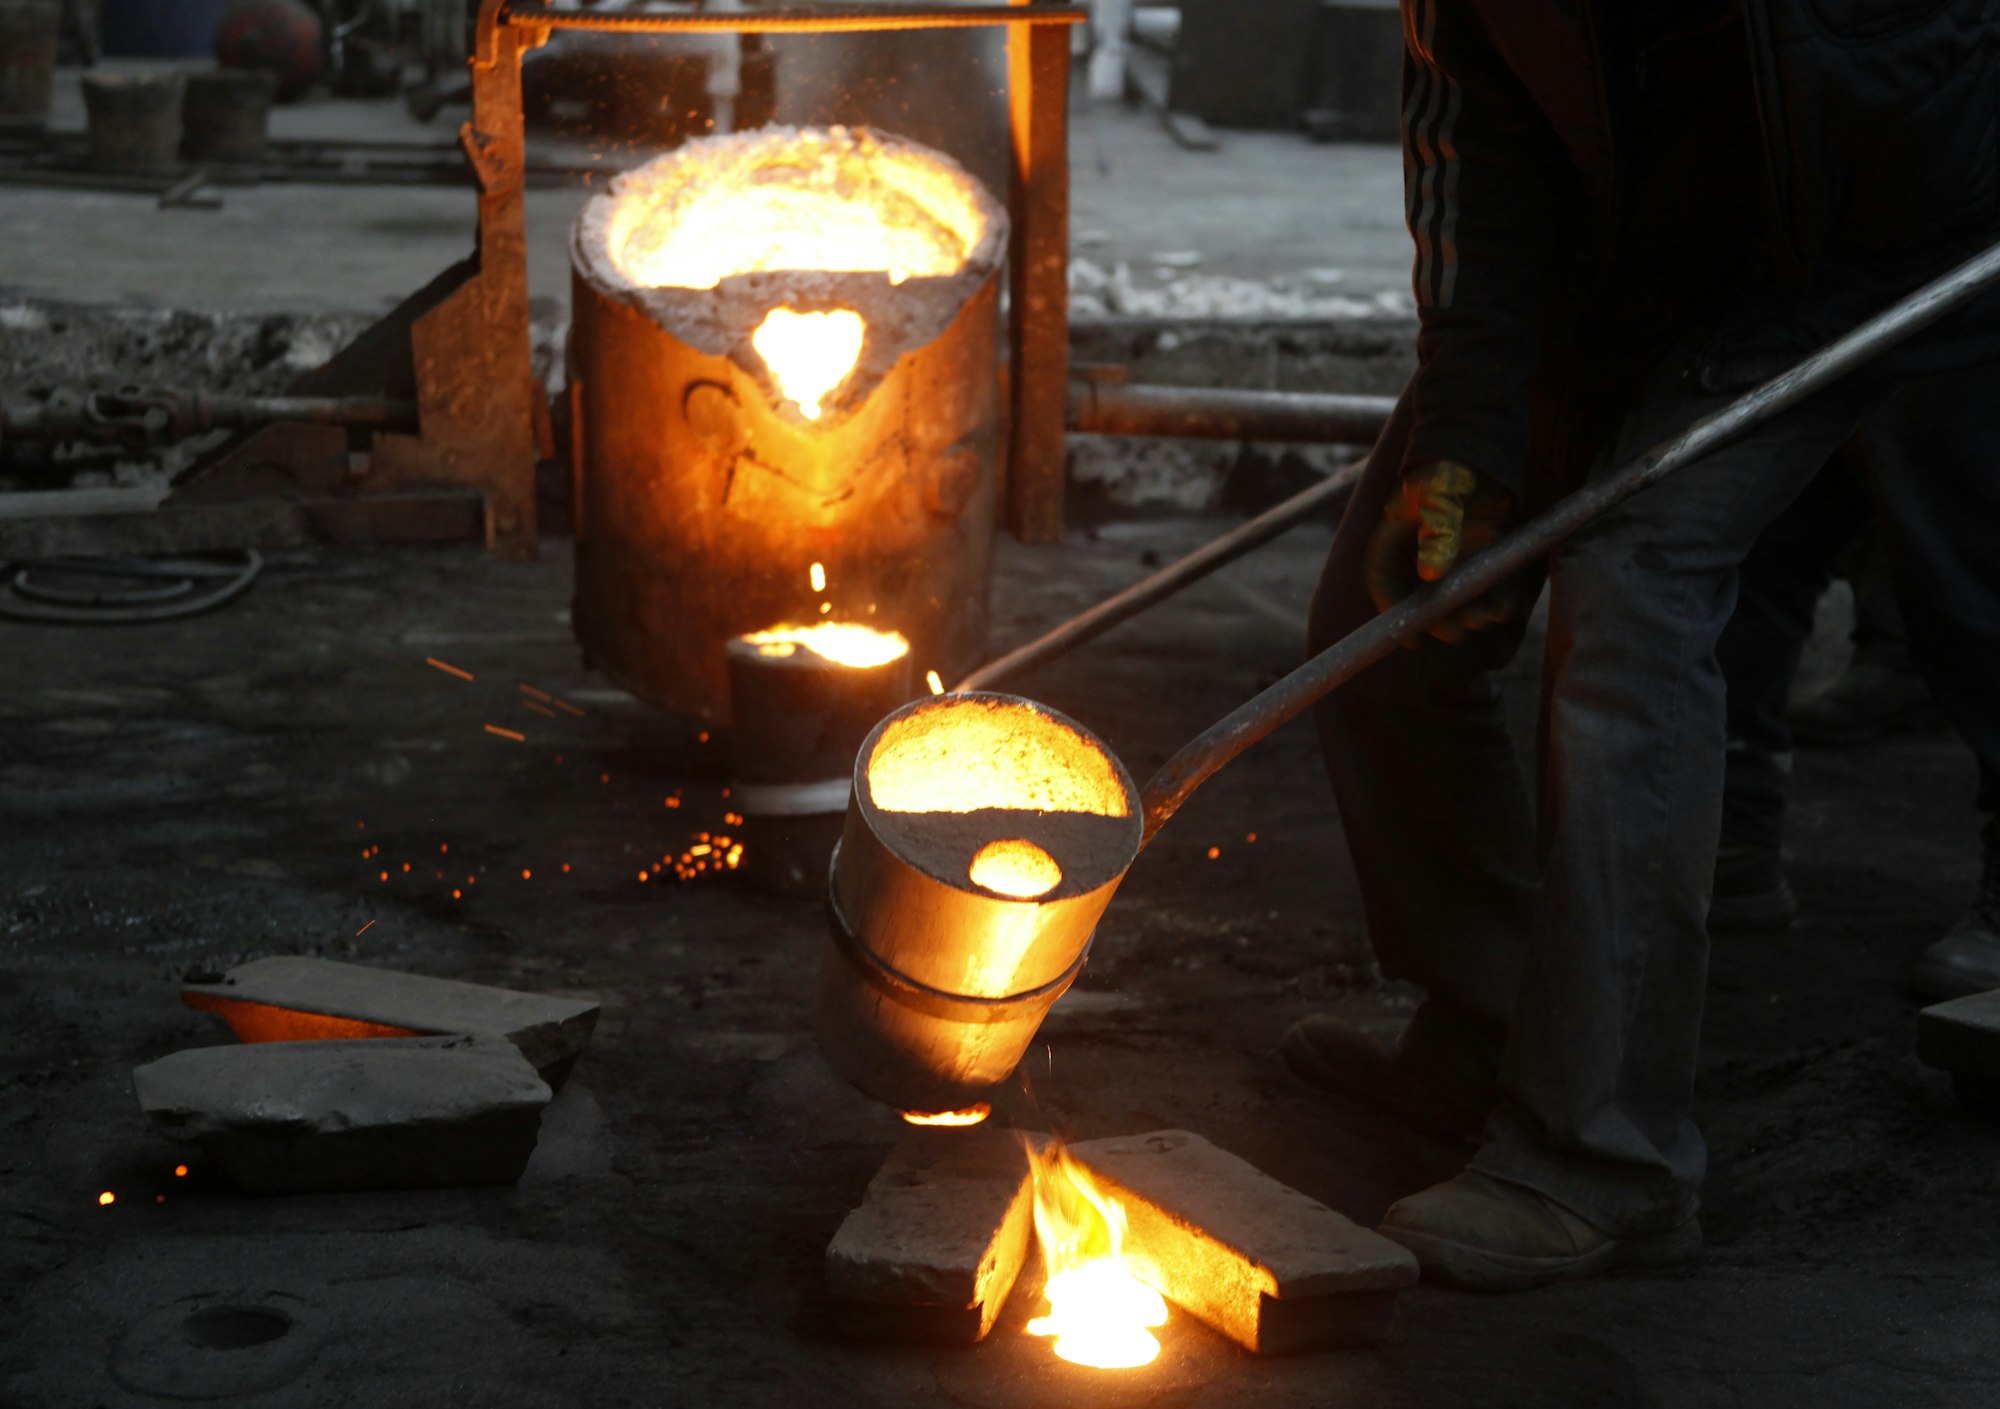 Liquid Molten Steel Industry. Casting, melting, molding and foundry.